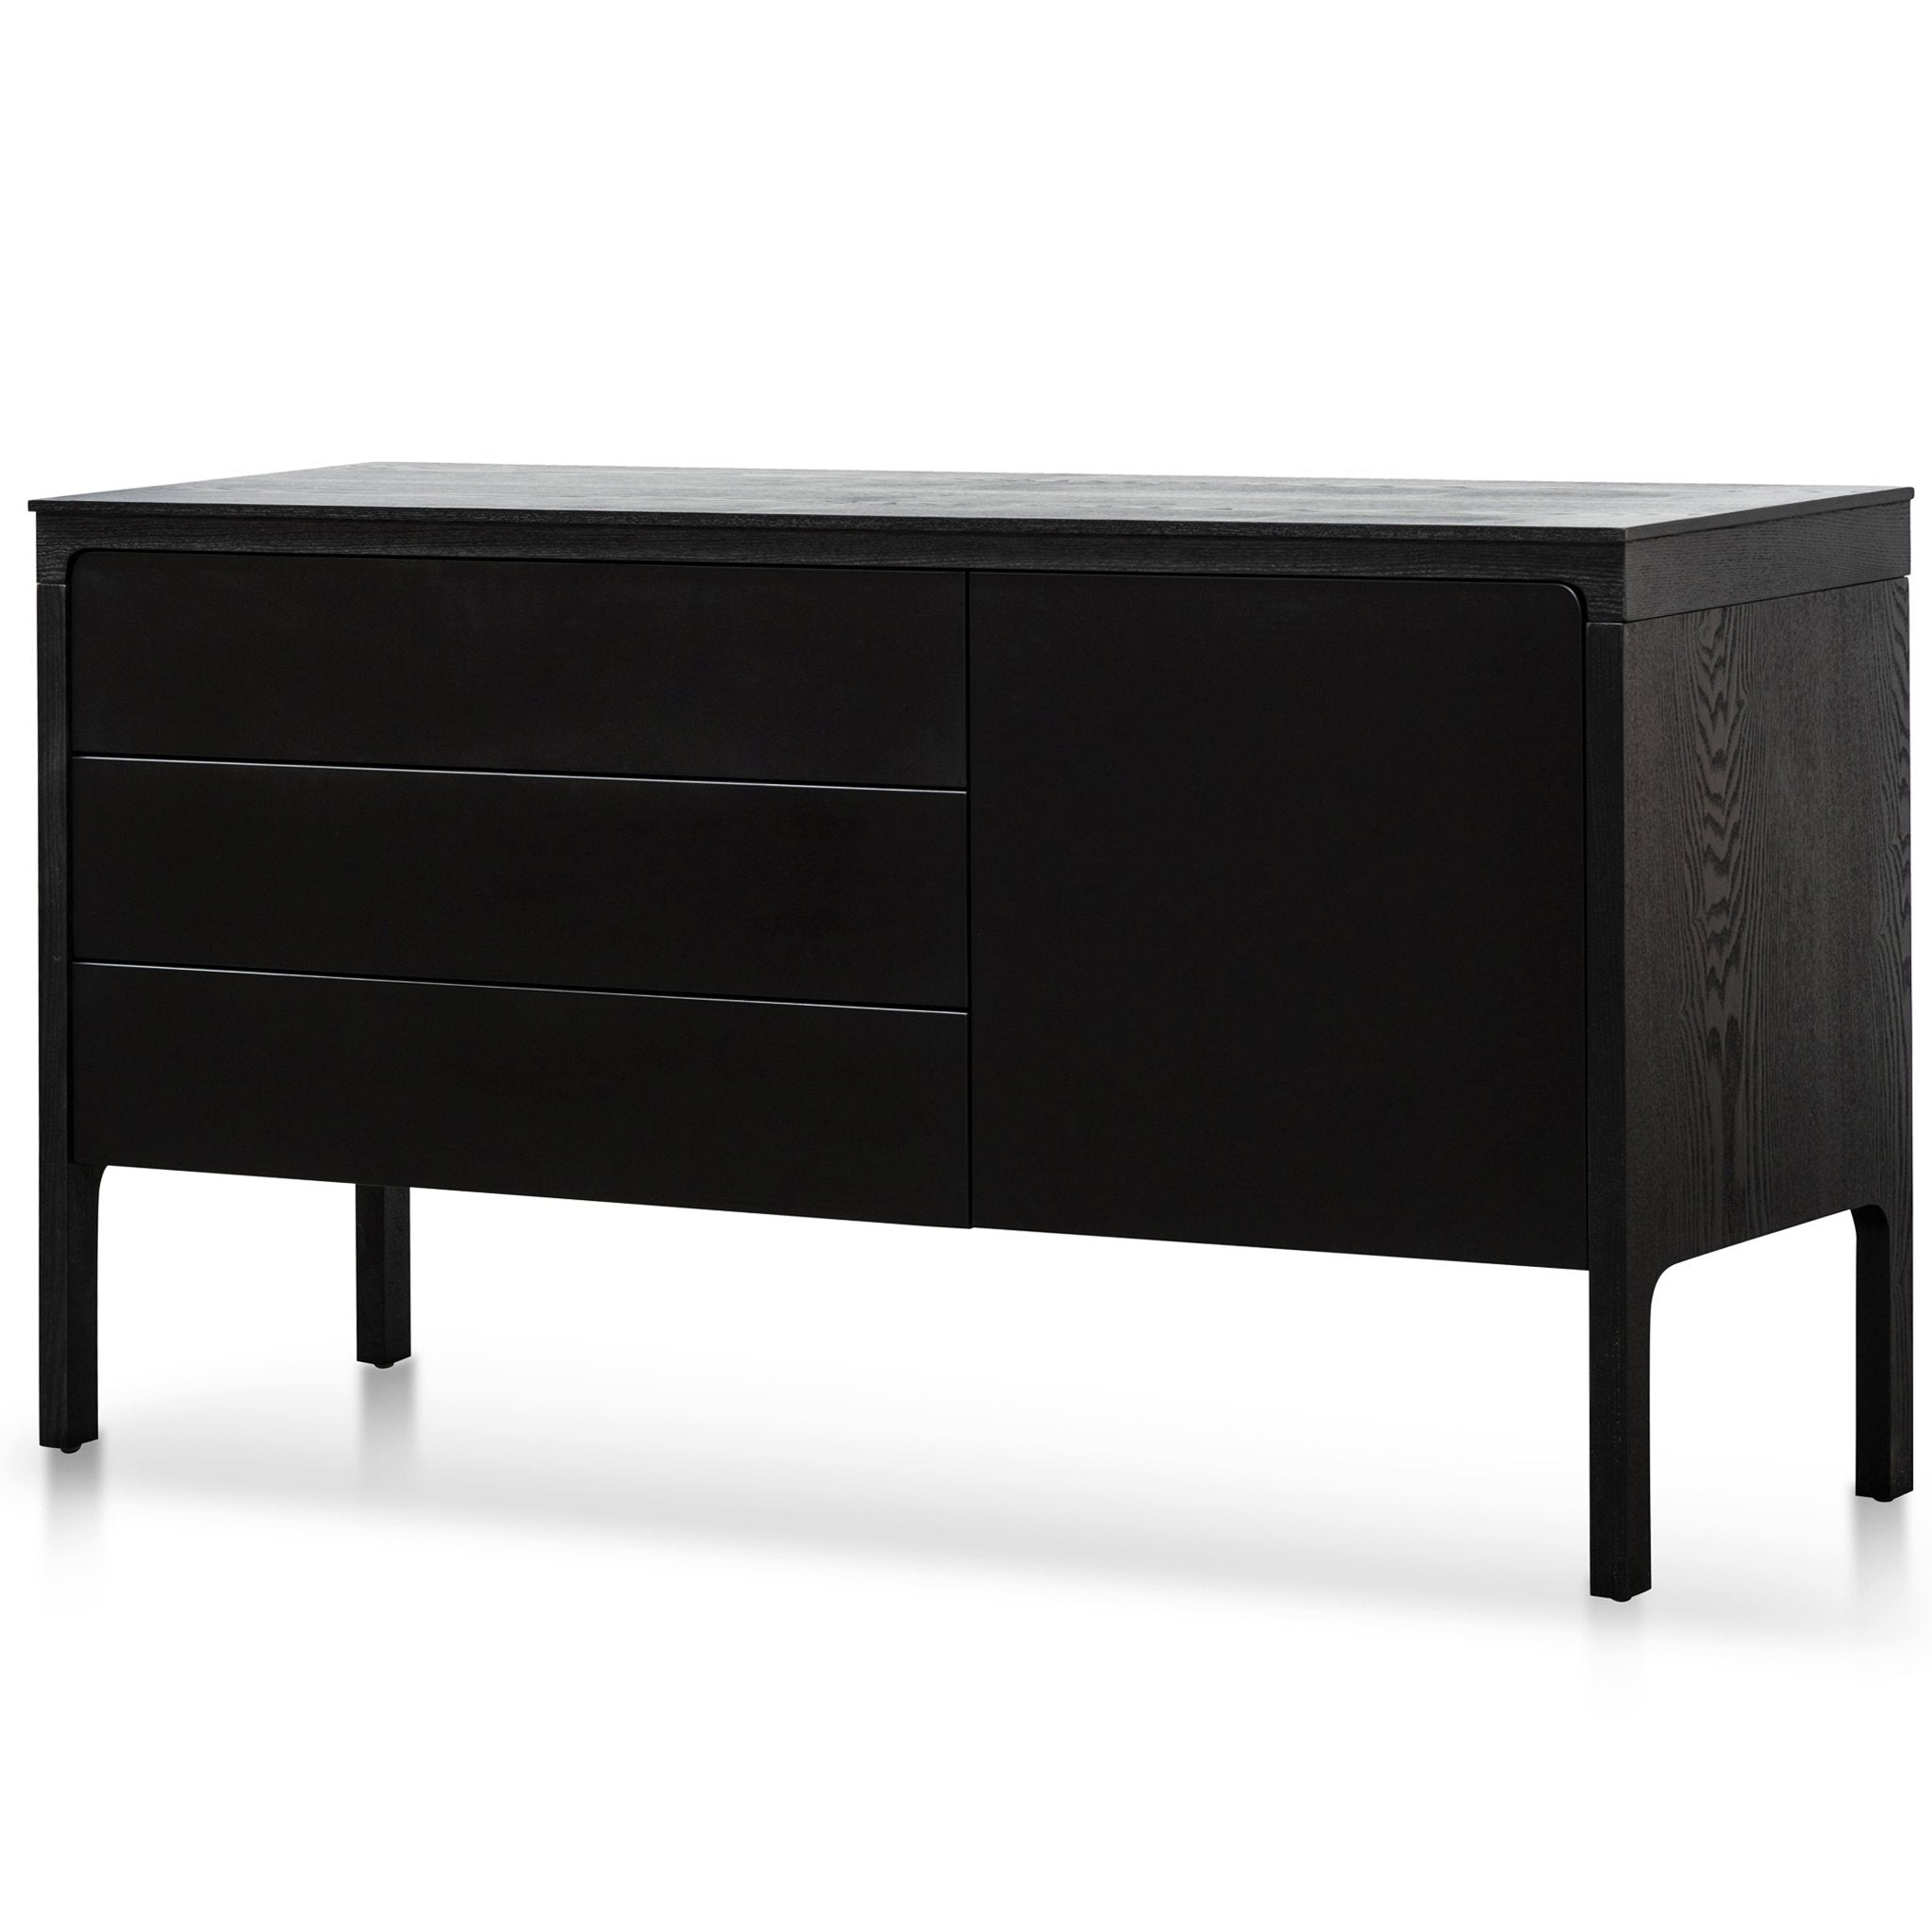 Everly Sideboard and Buffet Unit - Full Black